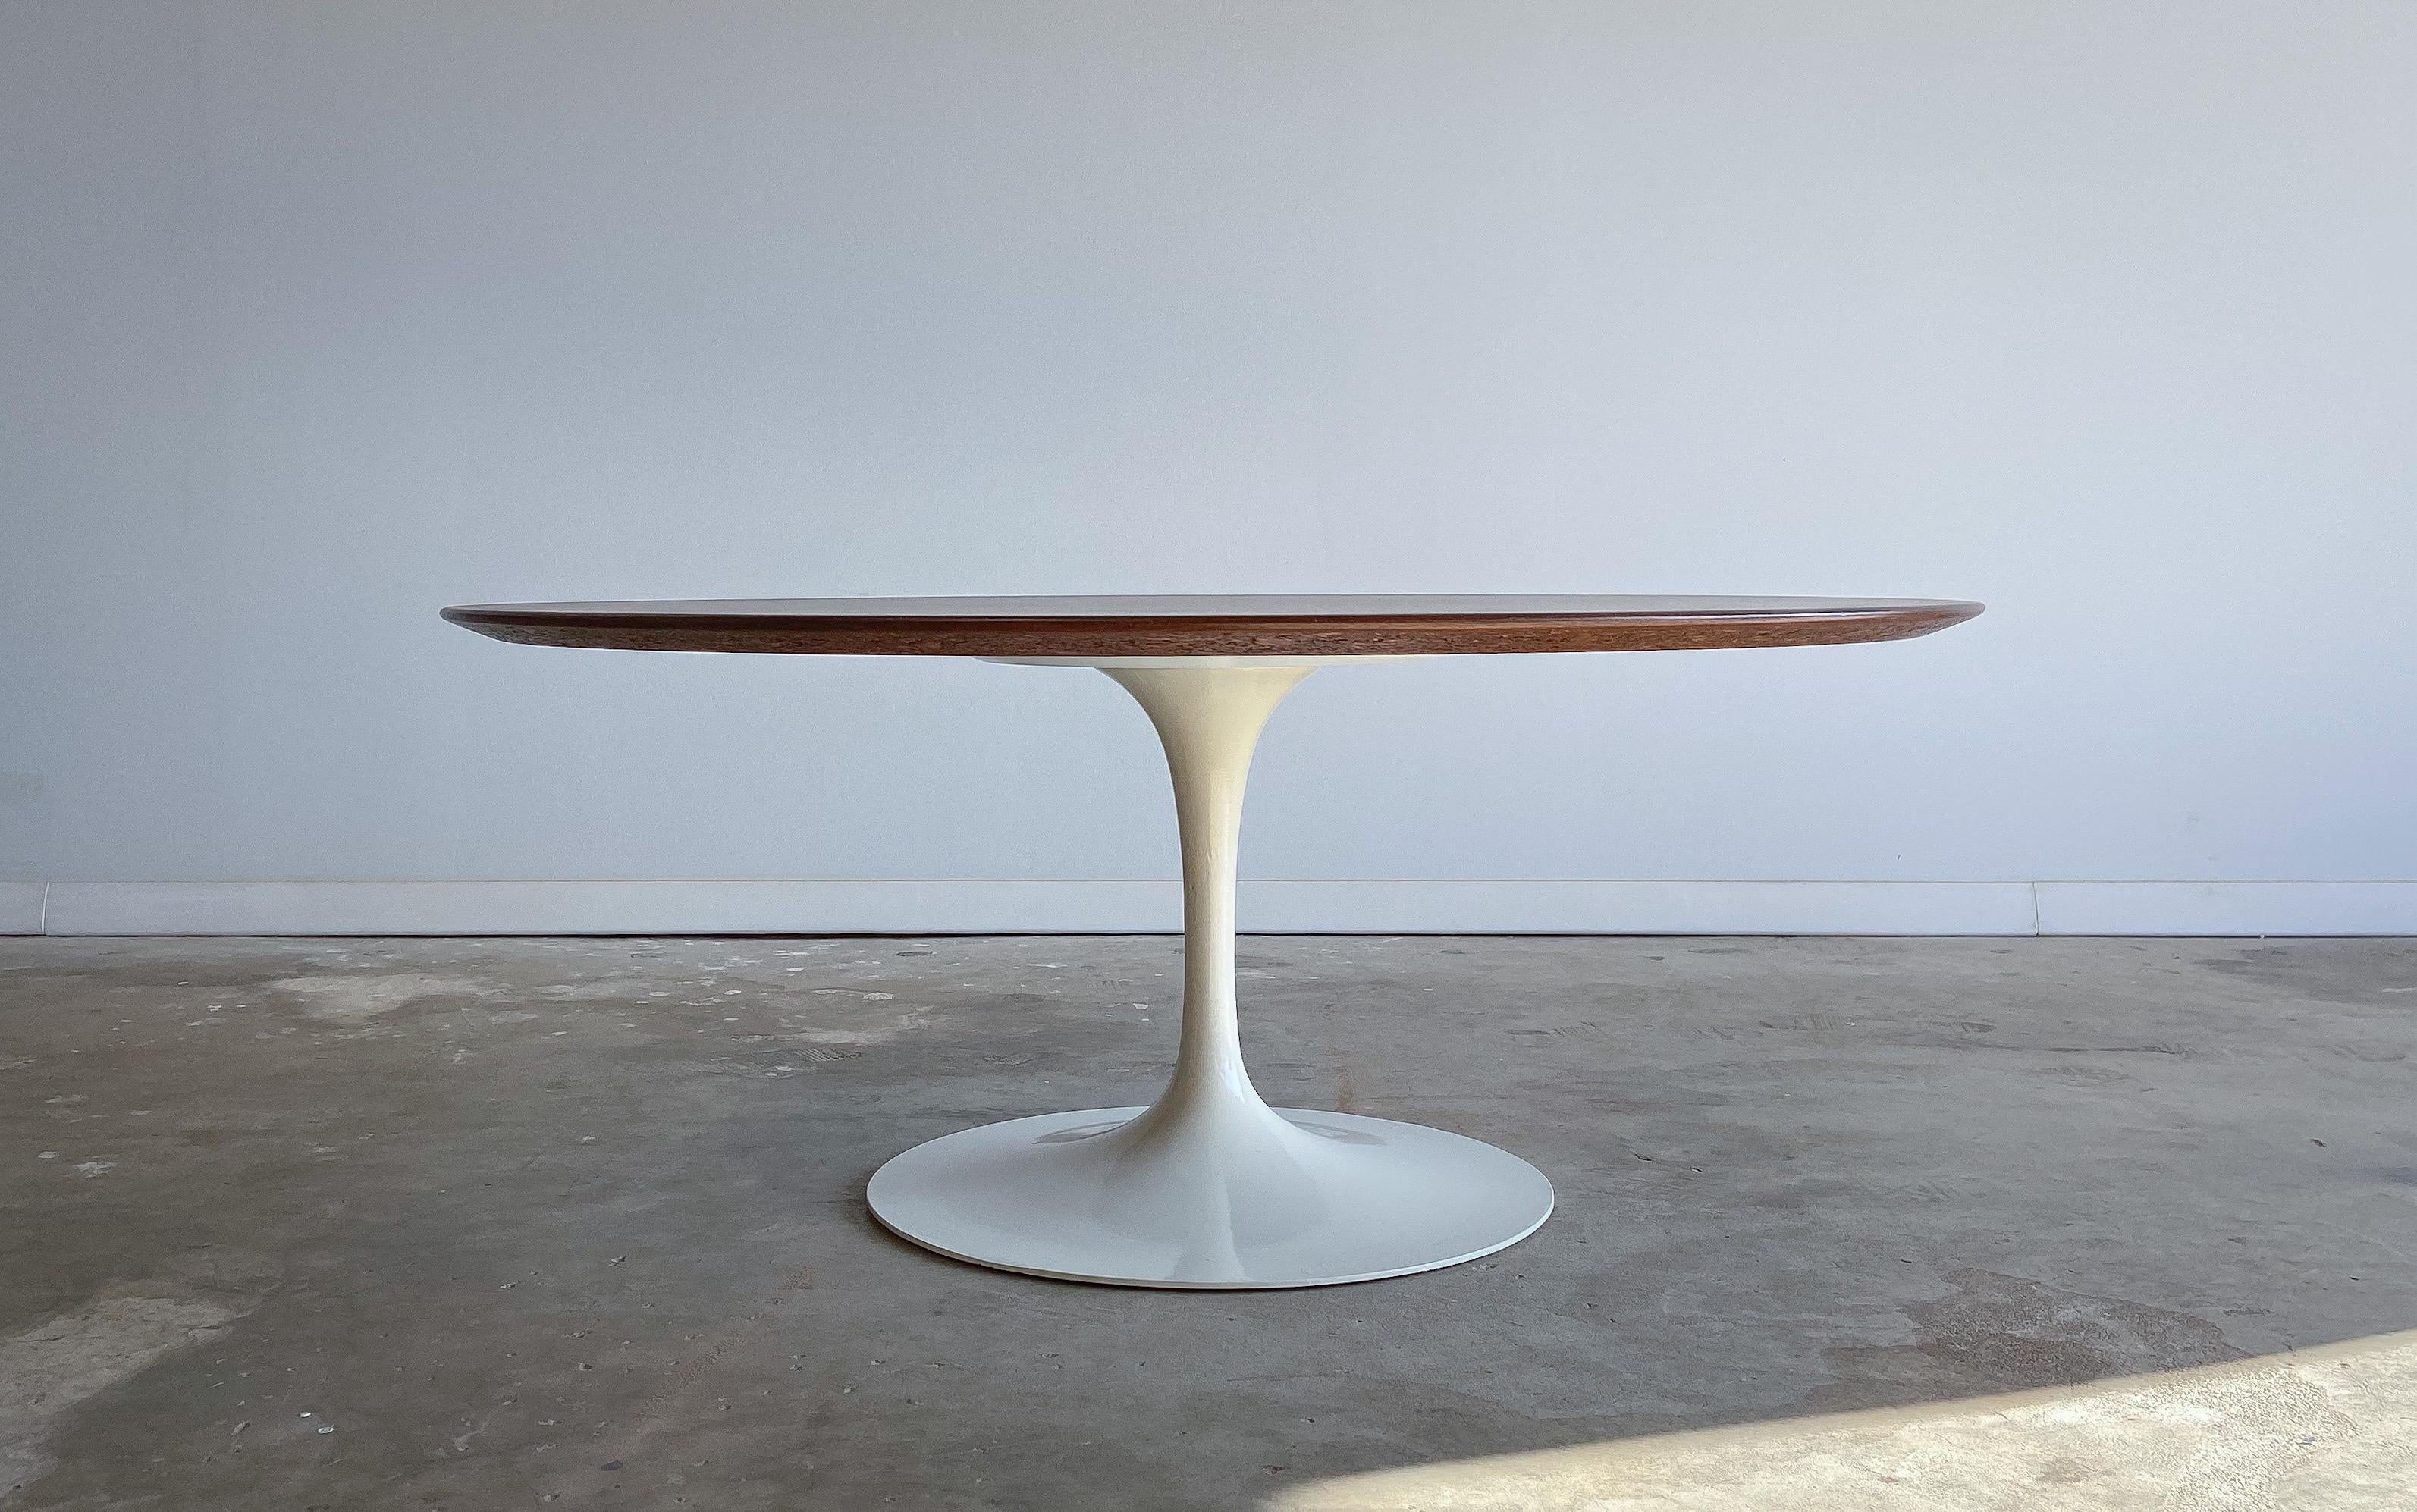 An iconic design from an iconic designer.

Eero Saarinen designed coffee table for Knoll International. This particular table was made in the 1970s.

Featuring a nicely figured walnut top, and powder coated cast aluminum tulip base. This would